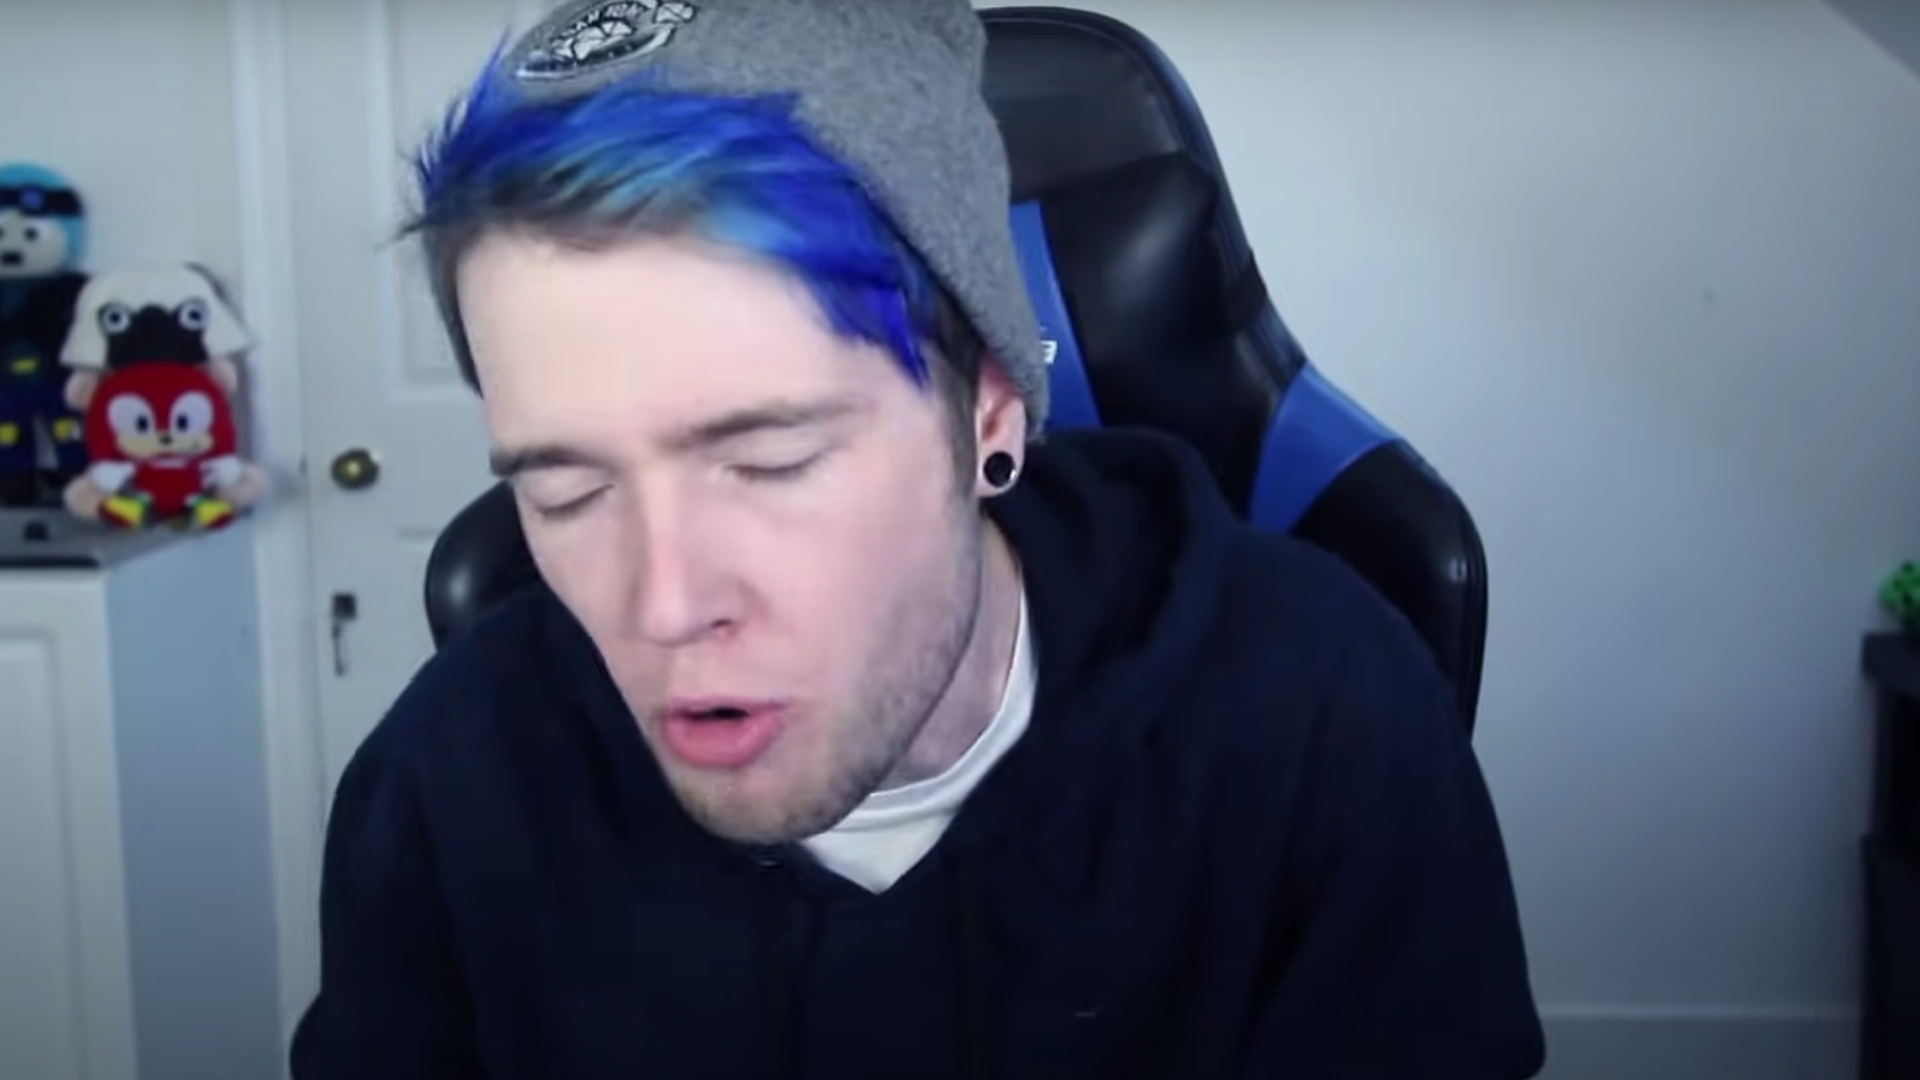 2. How to Get Dantdm's Blue and Pink Hair - wide 9